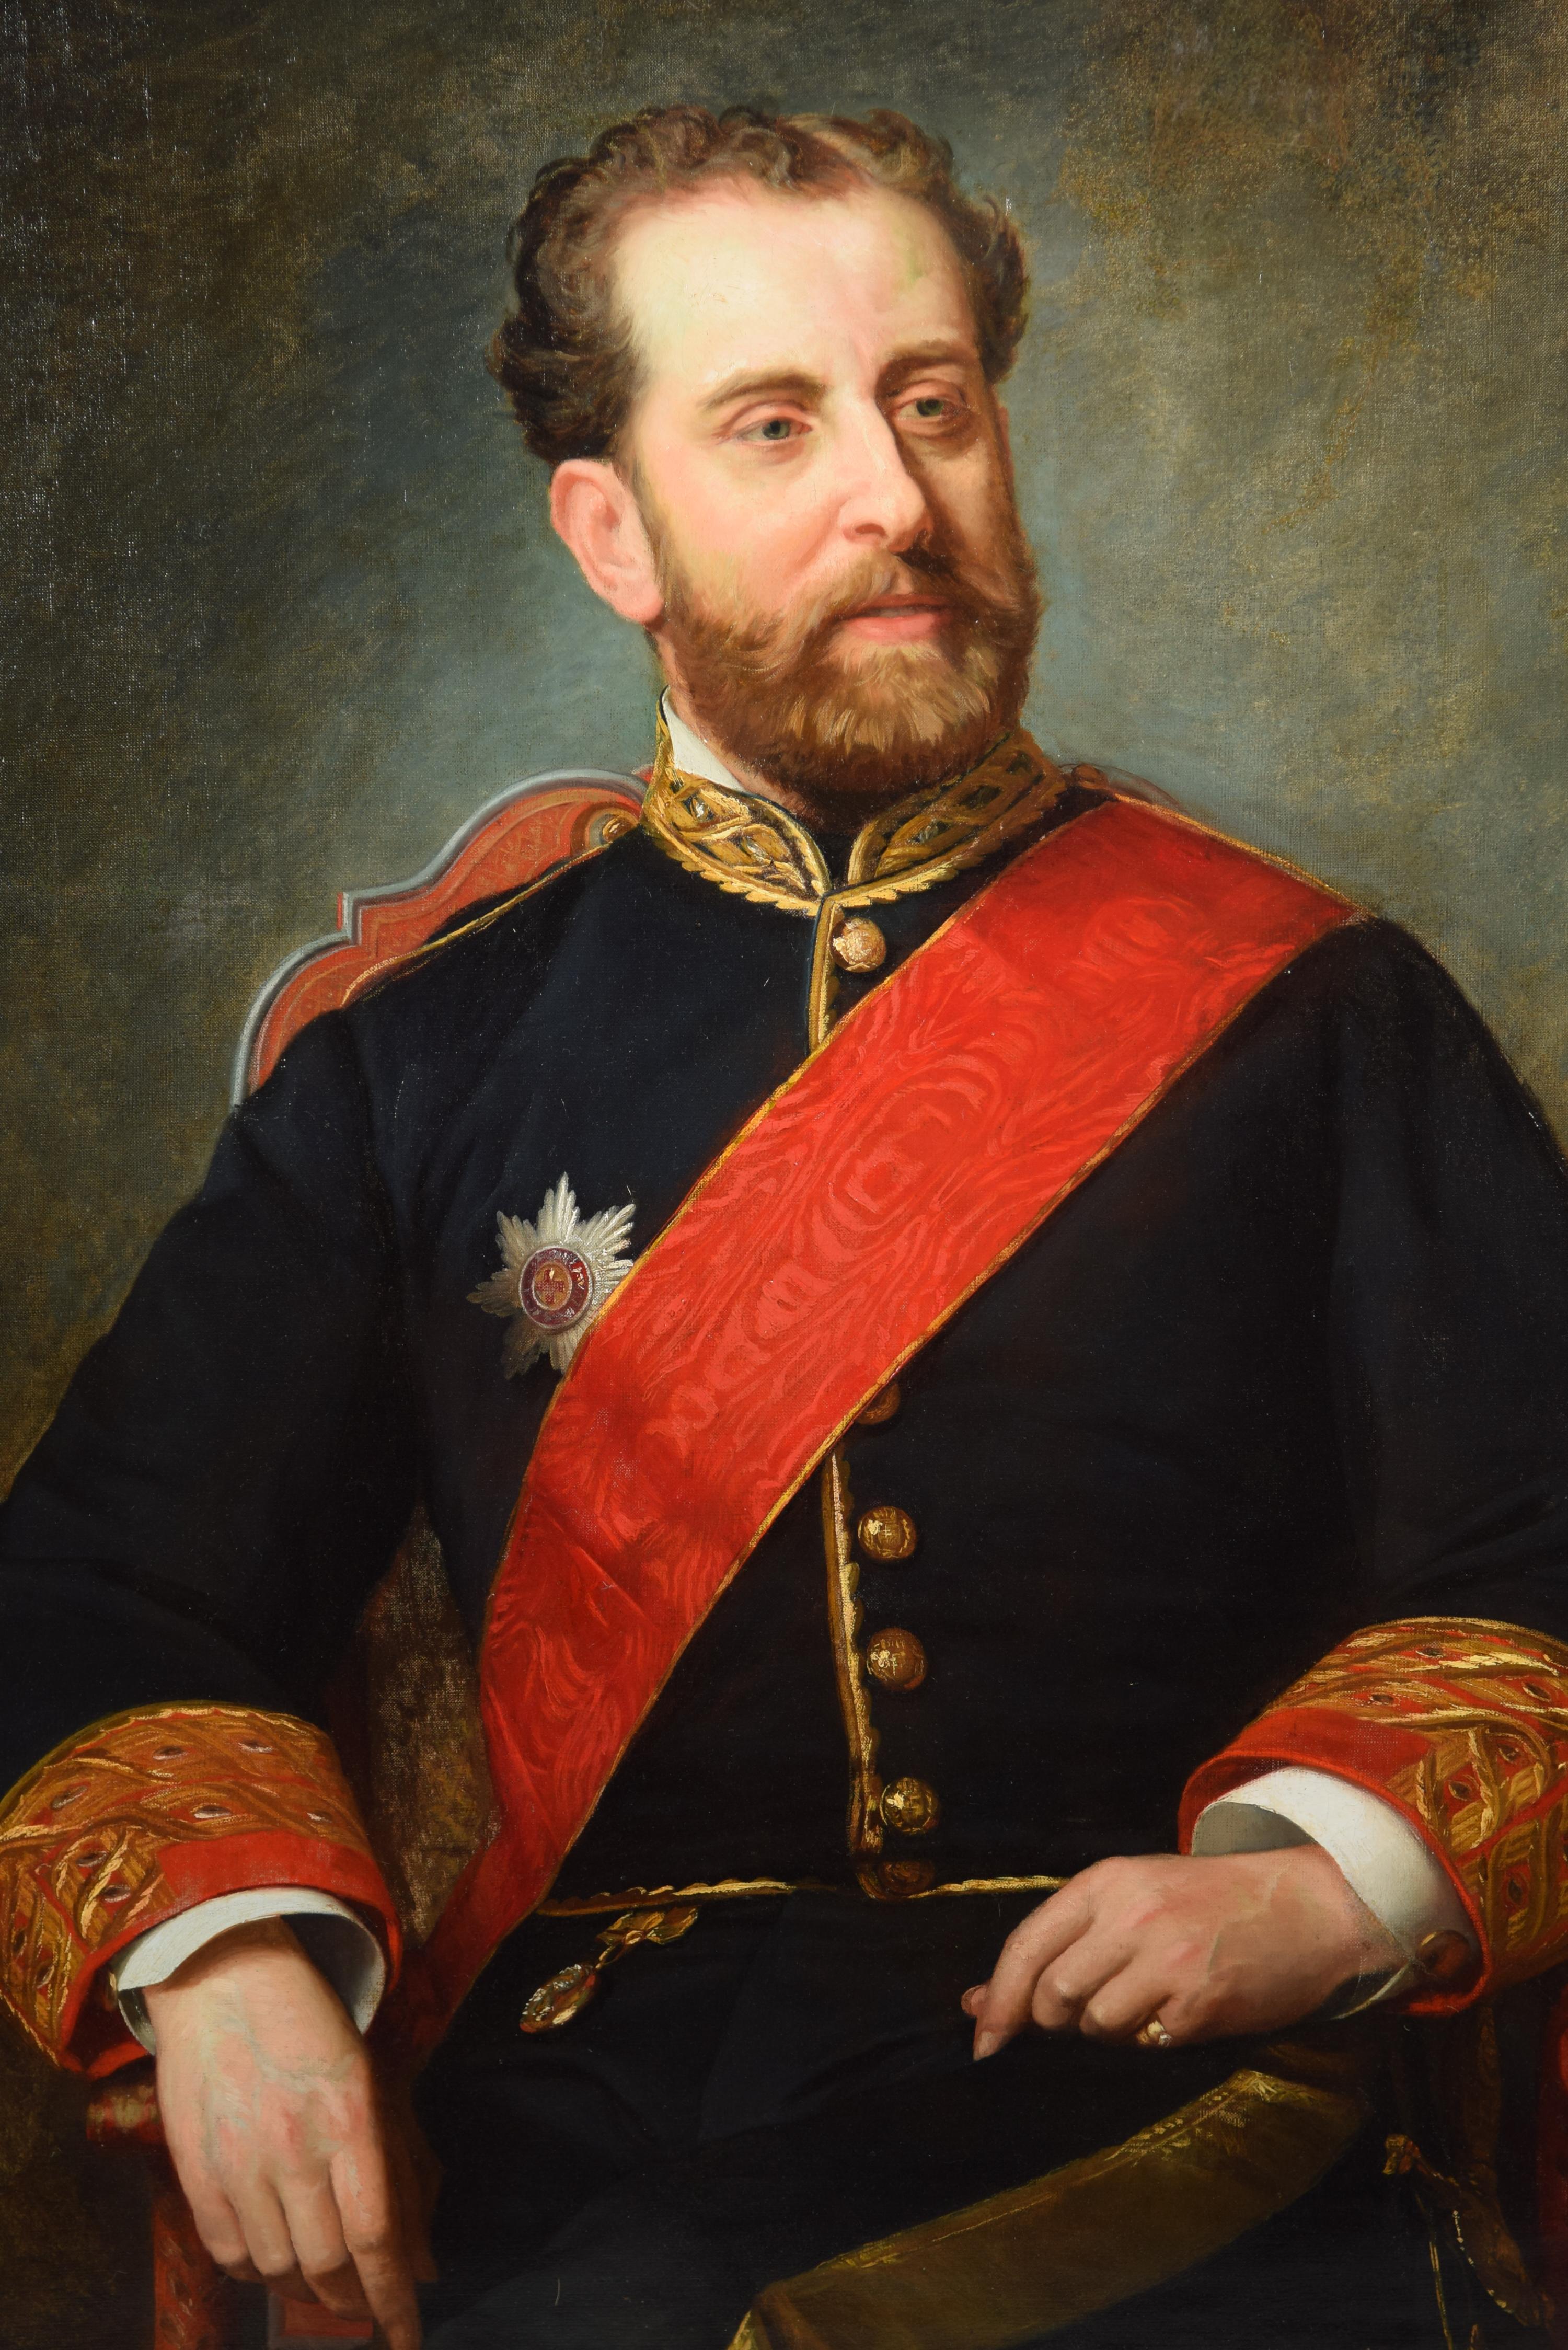 His Excellency Mr. Francisco Romero Robledo. Oil on canvas. SUÁREZ LLANOS, Ignacio (Gijón, 1830-Madrid, 1881), Spain, 1876.
Signed, identified and dated.
Three-quarter portrait on a dark neutral background showing a seated gentleman dressed in